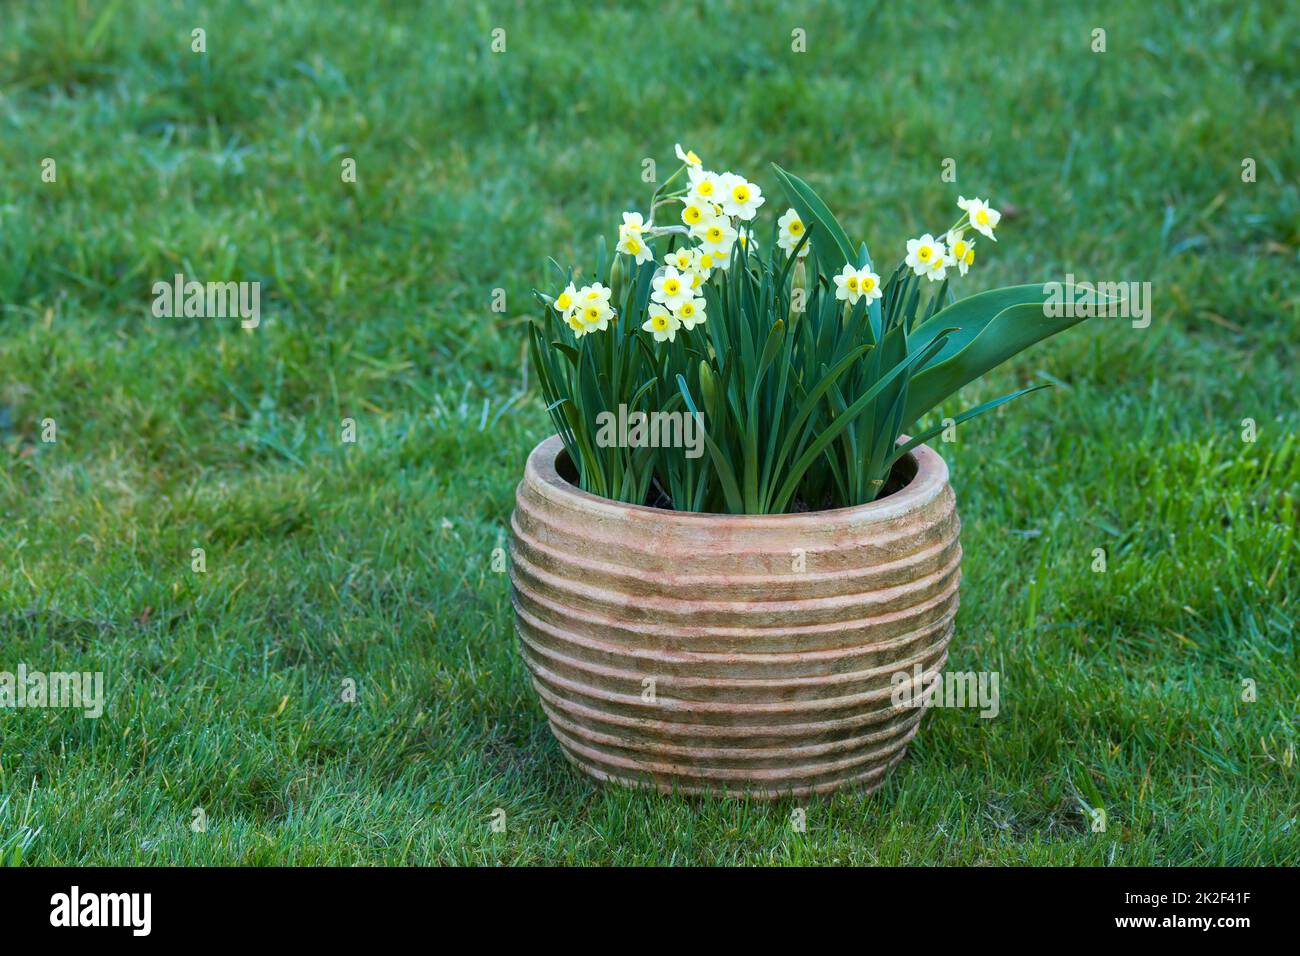 the daffodil flowers in a clay pot Stock Photo